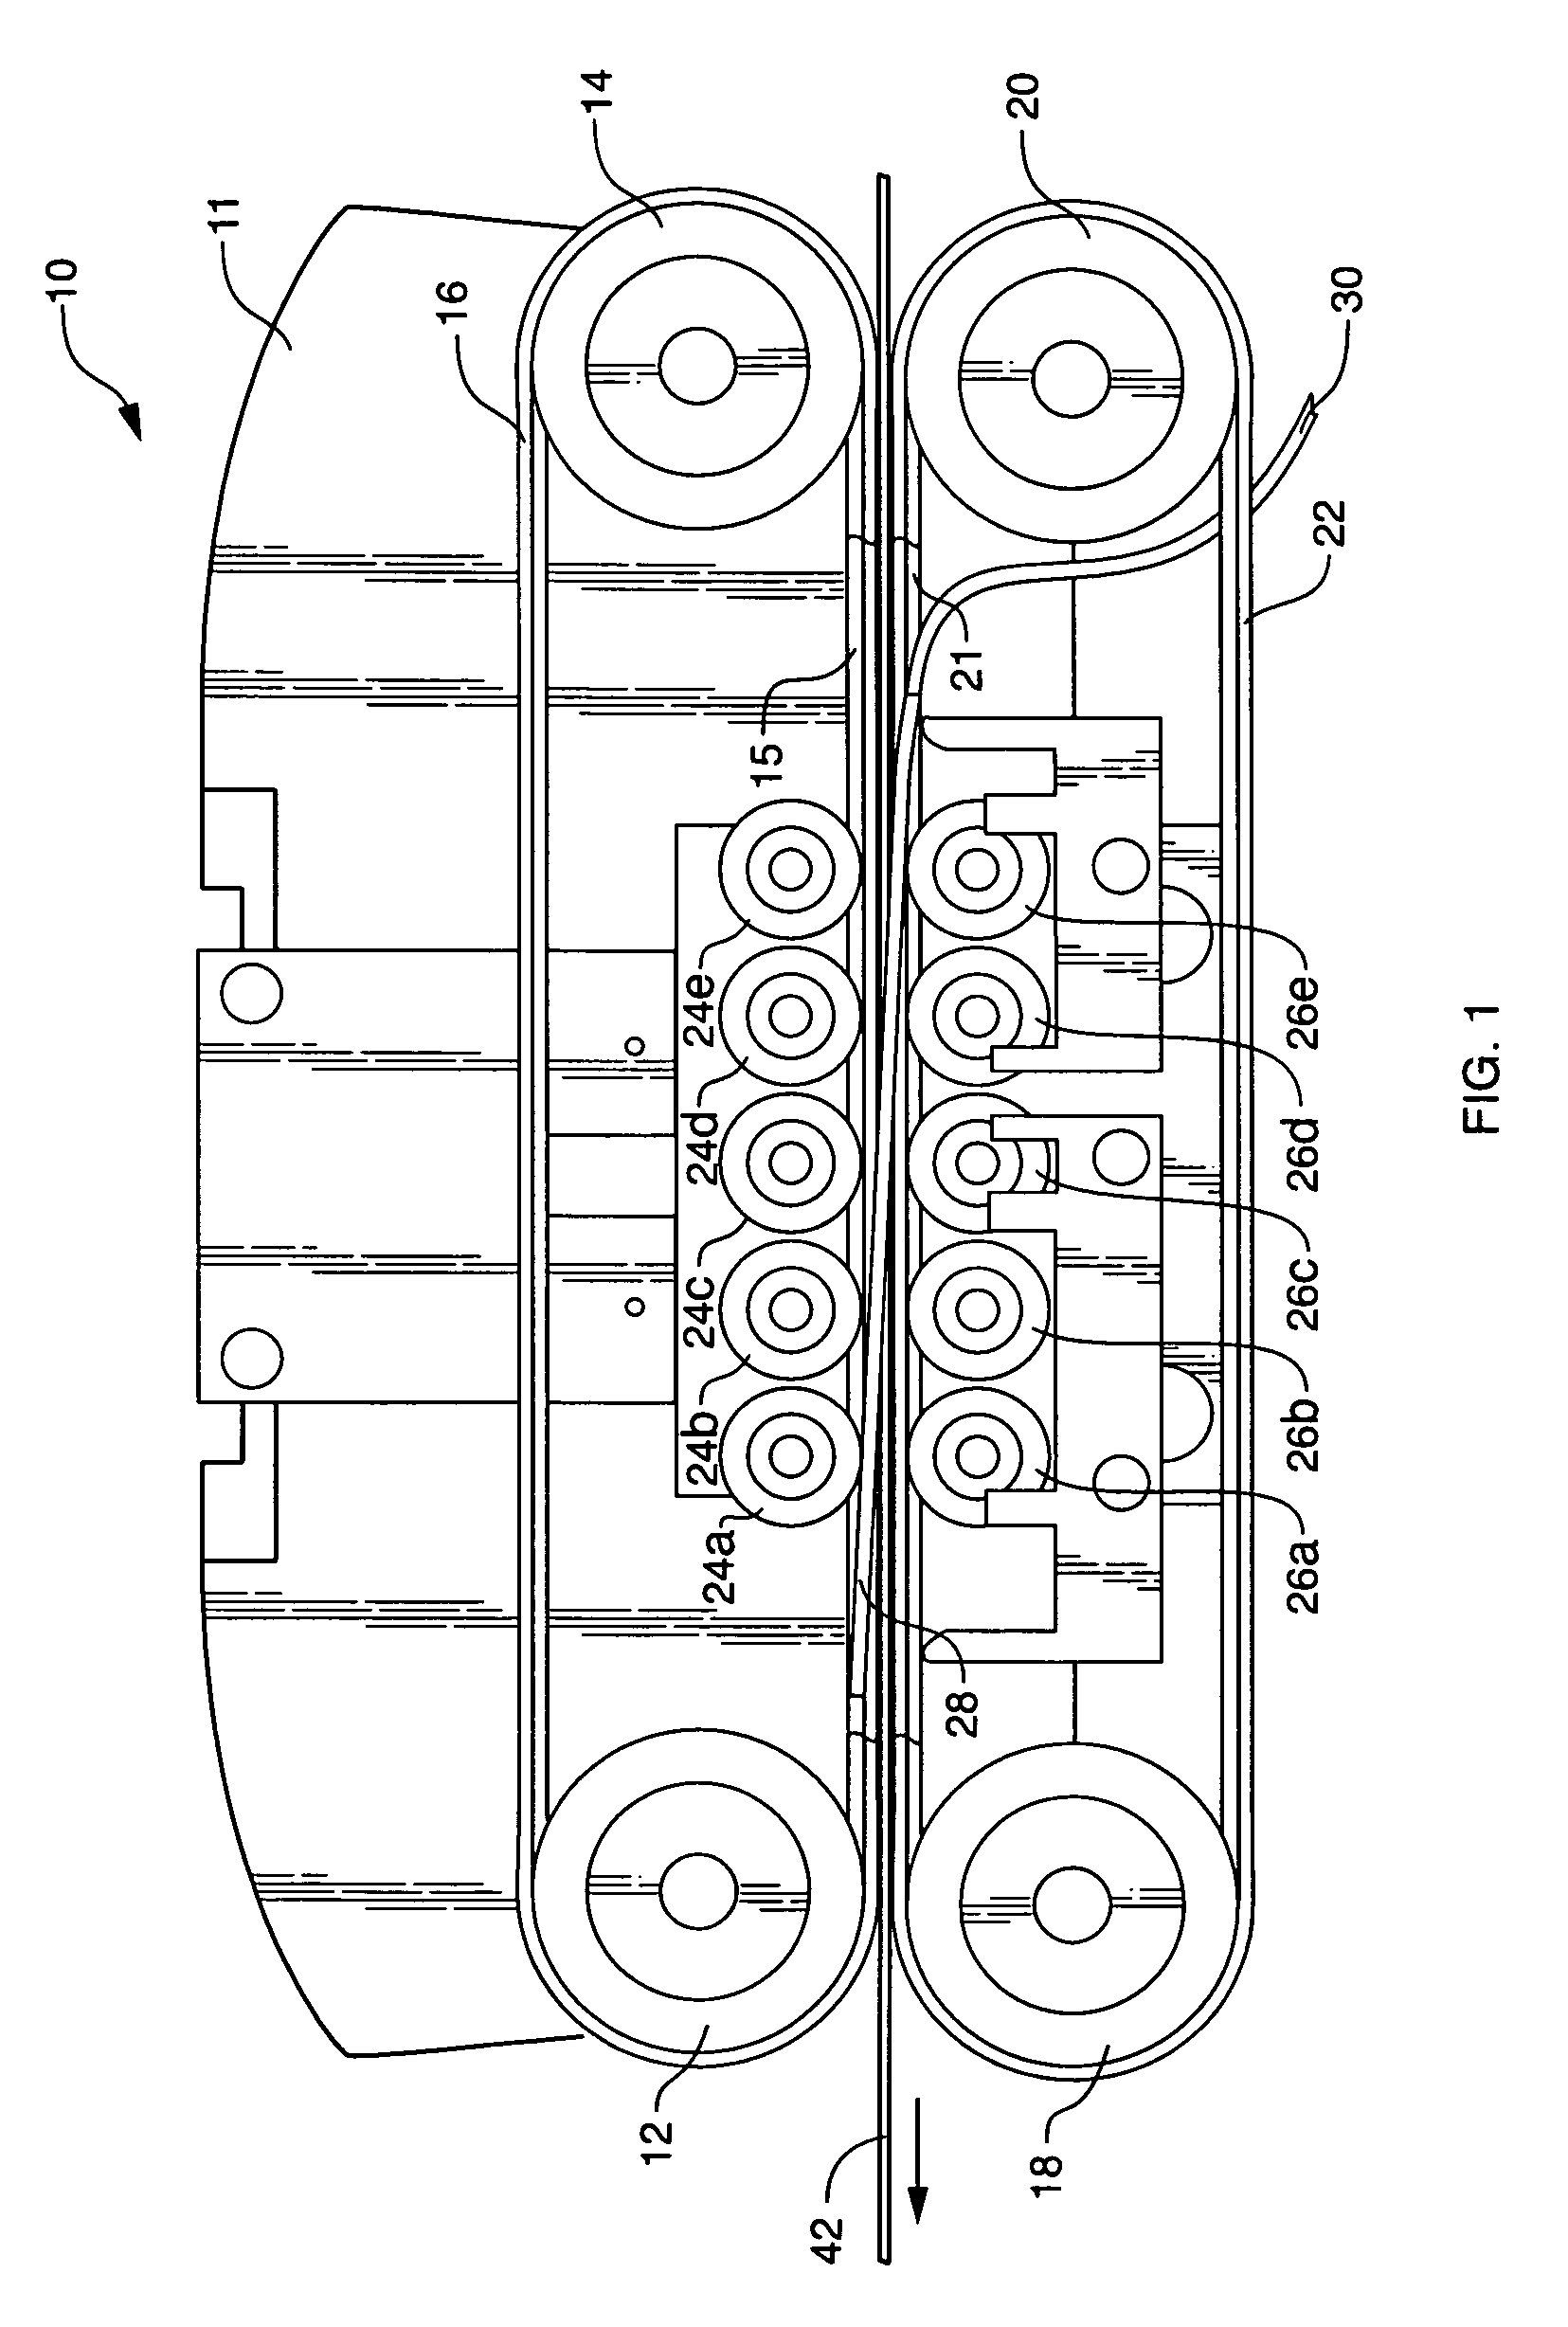 Film side sealing apparatus with closed-loop temperature control of a heater